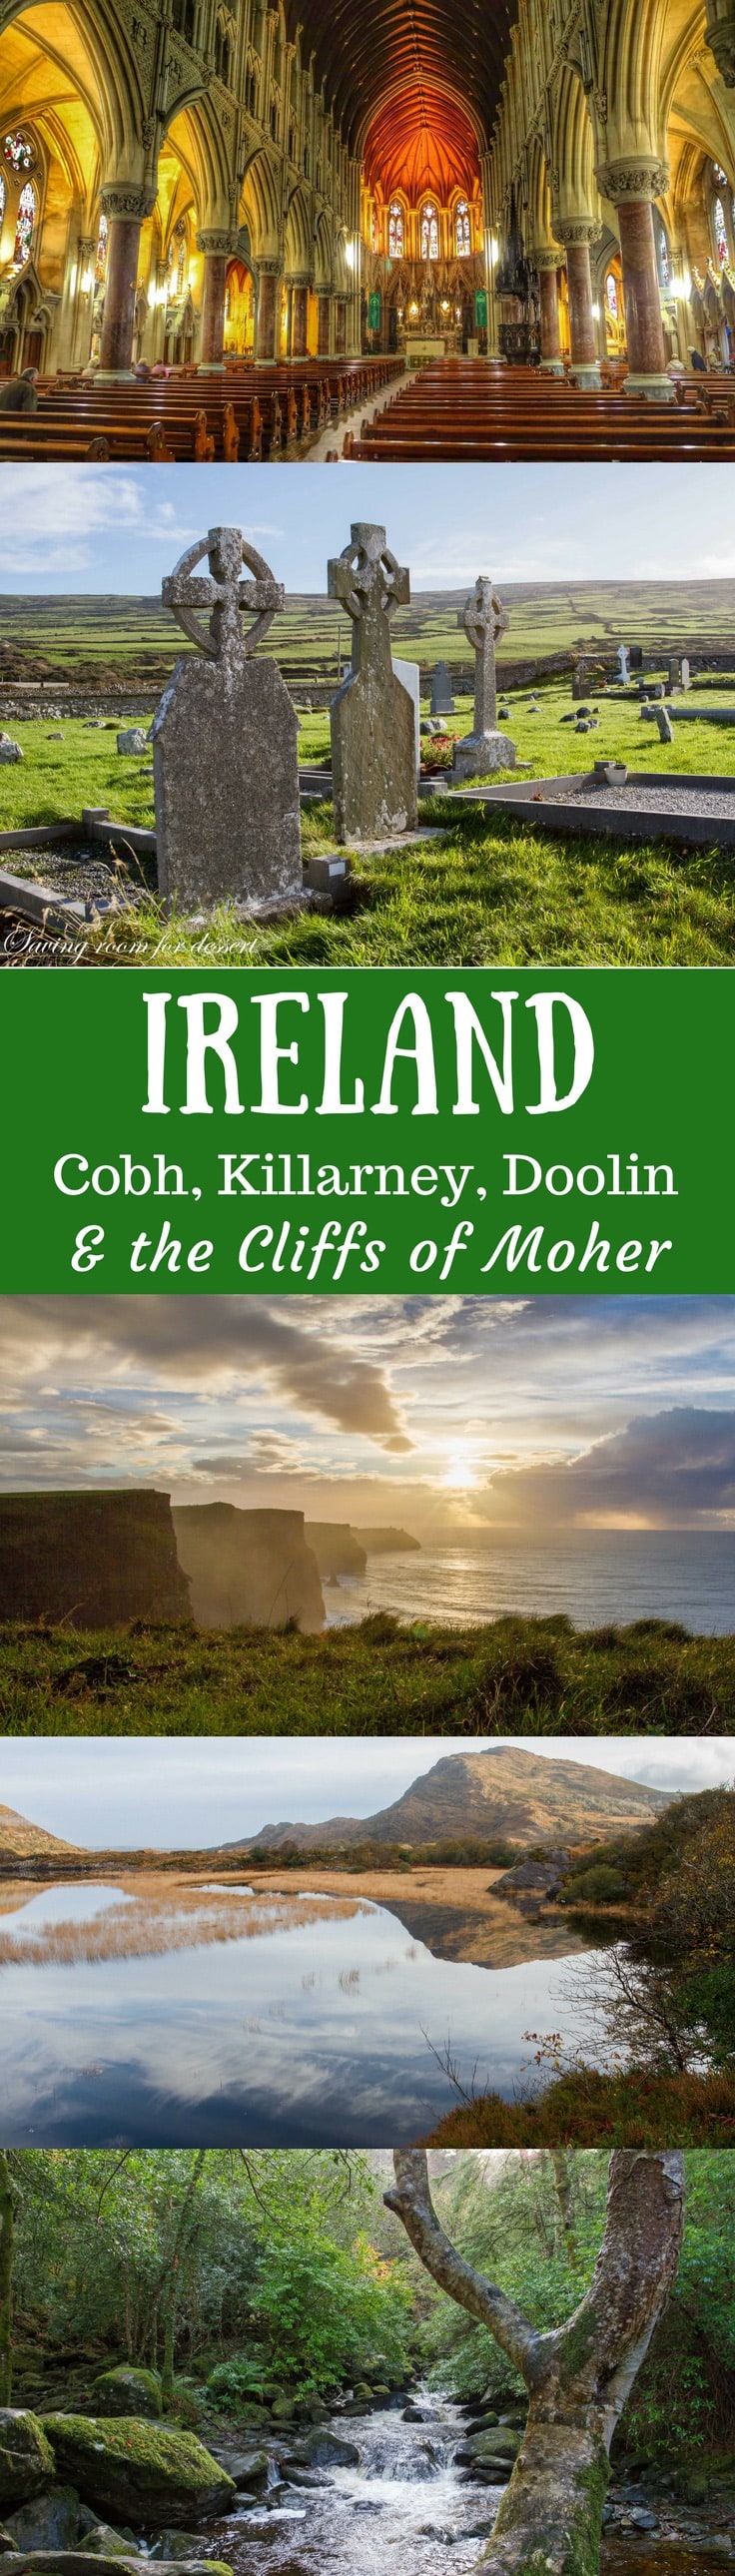 Pull up a chair and take a look at our adventures in Ireland - in this post we visit Cobh, Killarney, Doolin & the Cliffs of Moher - amazing! #savingroomfordessert #ireland #cobh #killarney #doolin #cliffsofmoher #travel